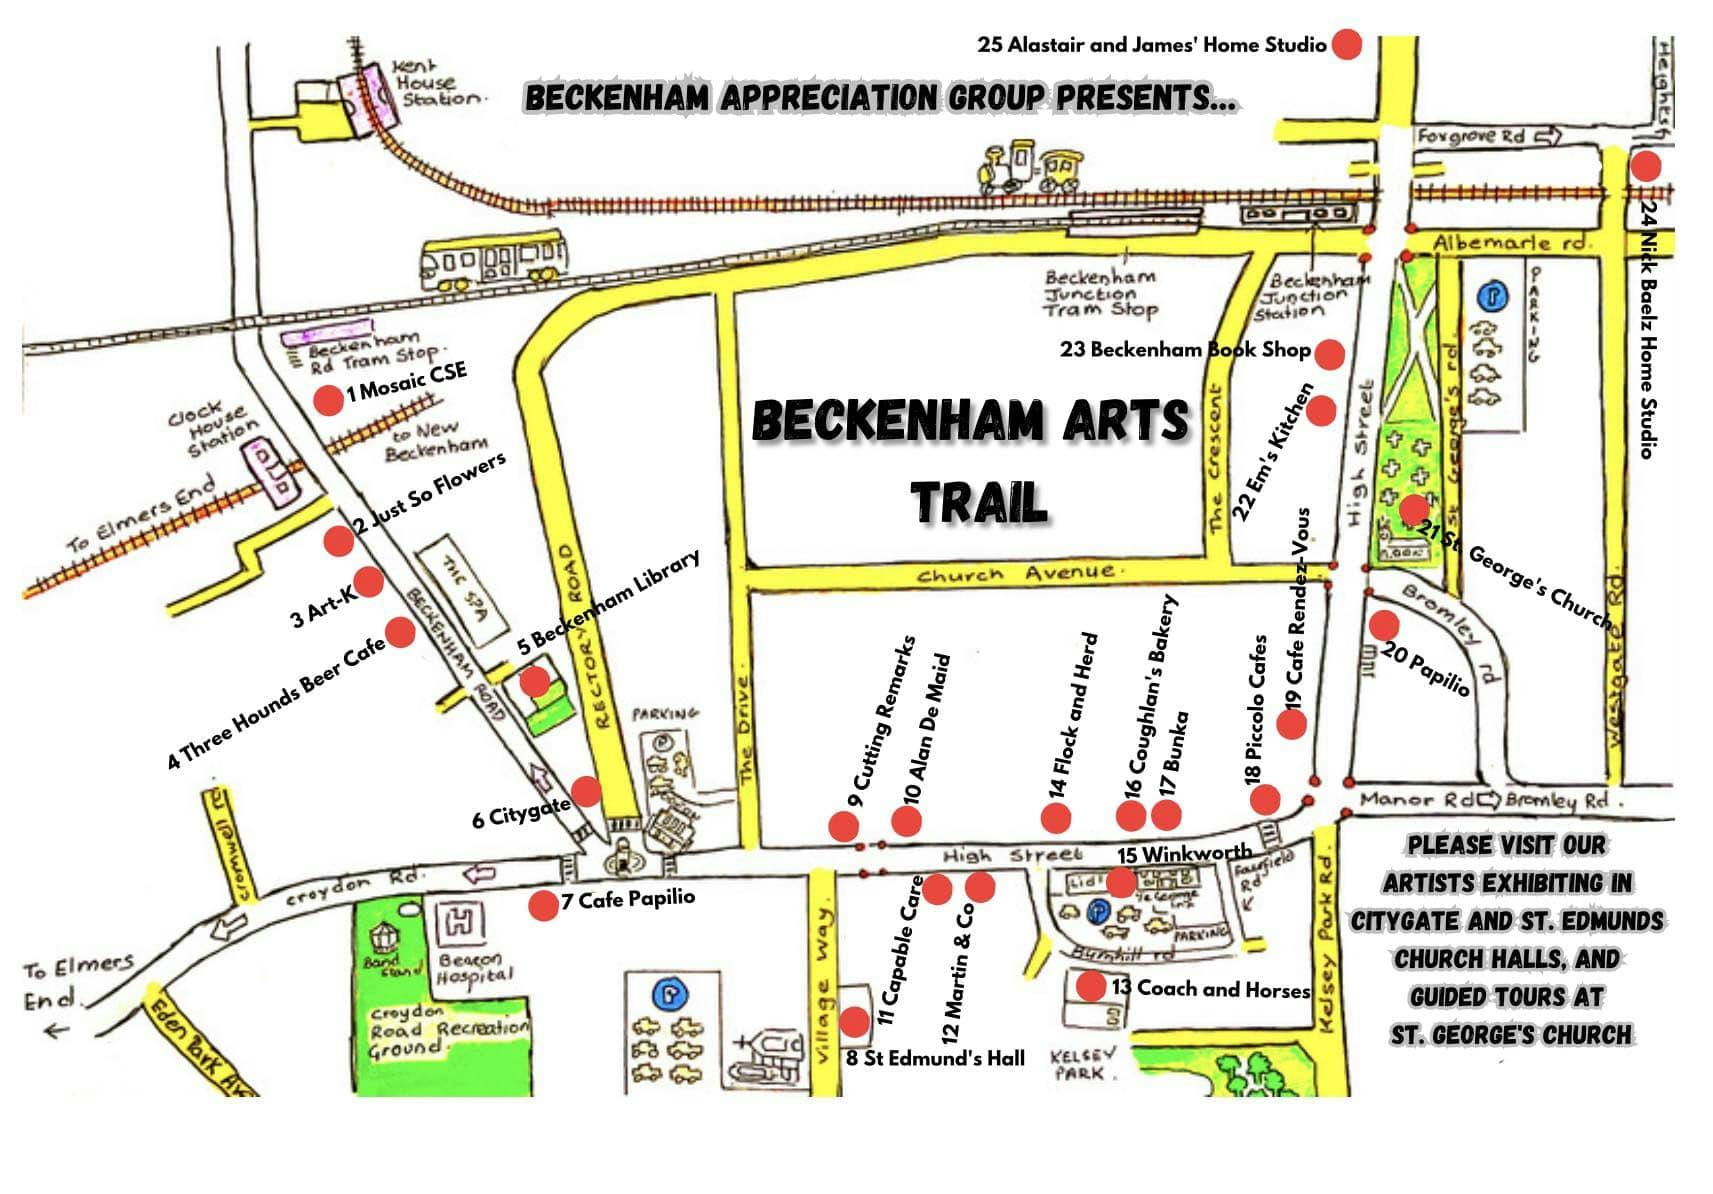 A map of Beckenham with the locations for the art trail